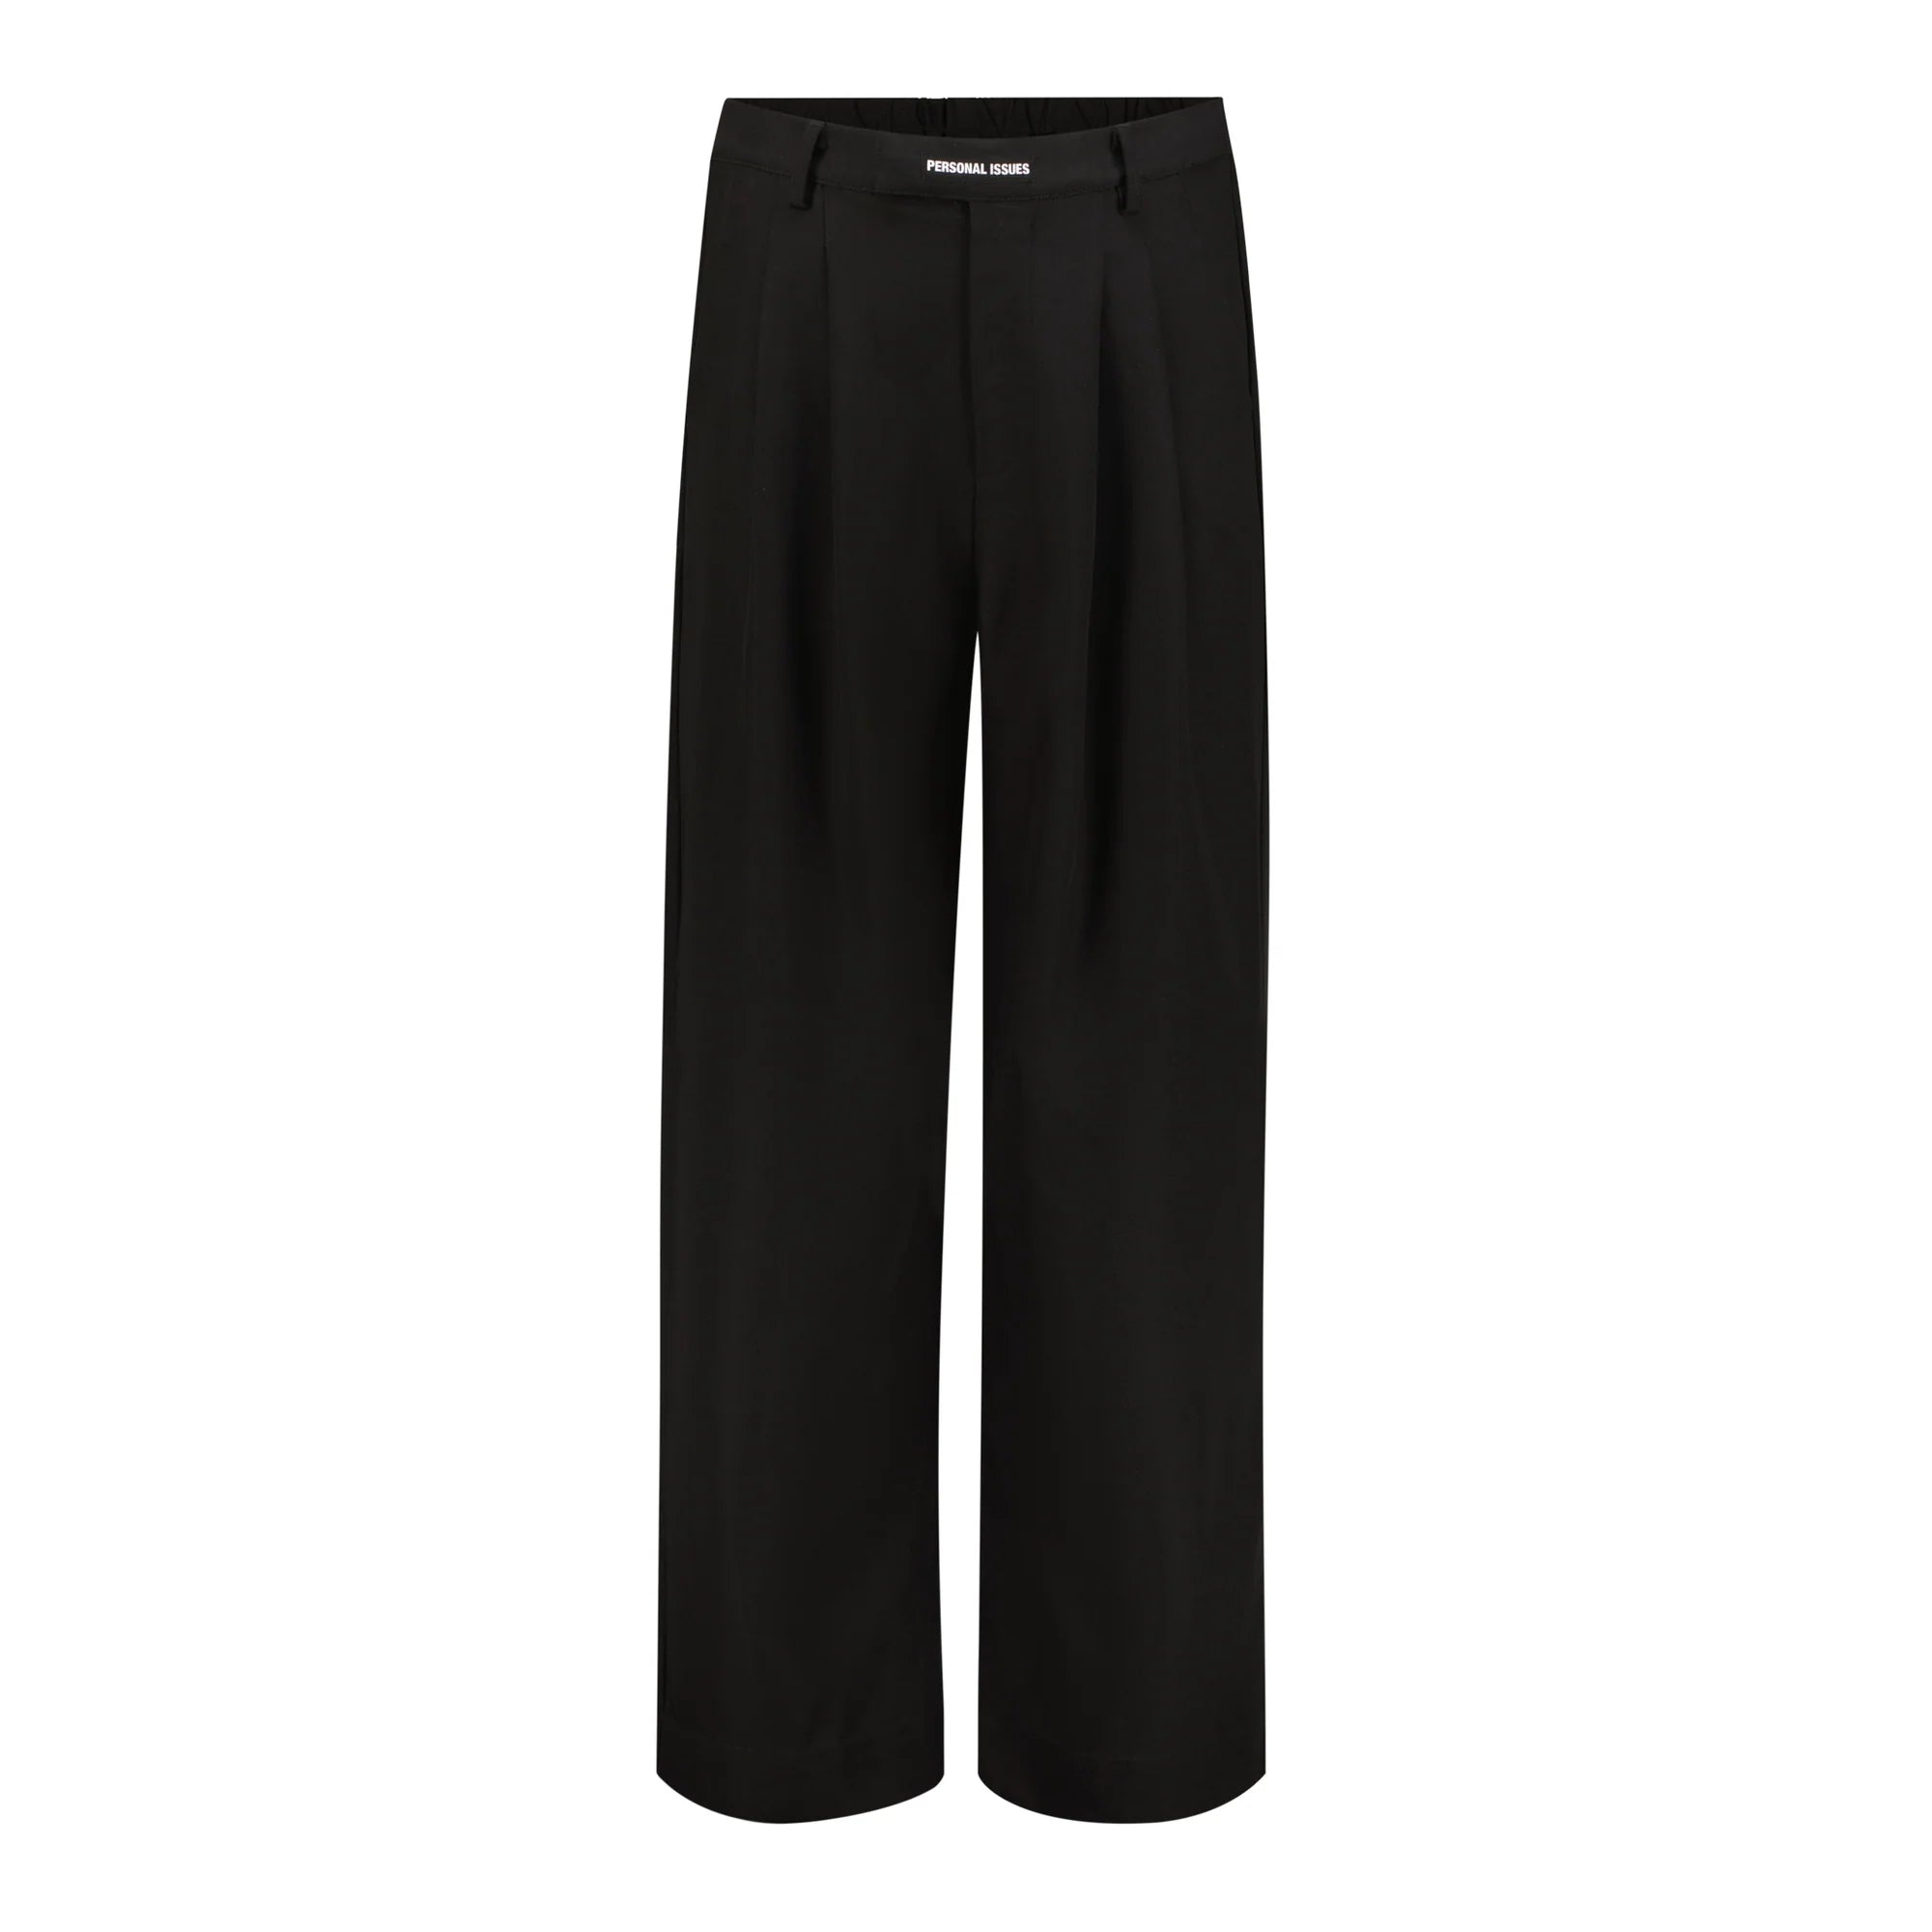 Personal Issues Big Fit Trousers - Black